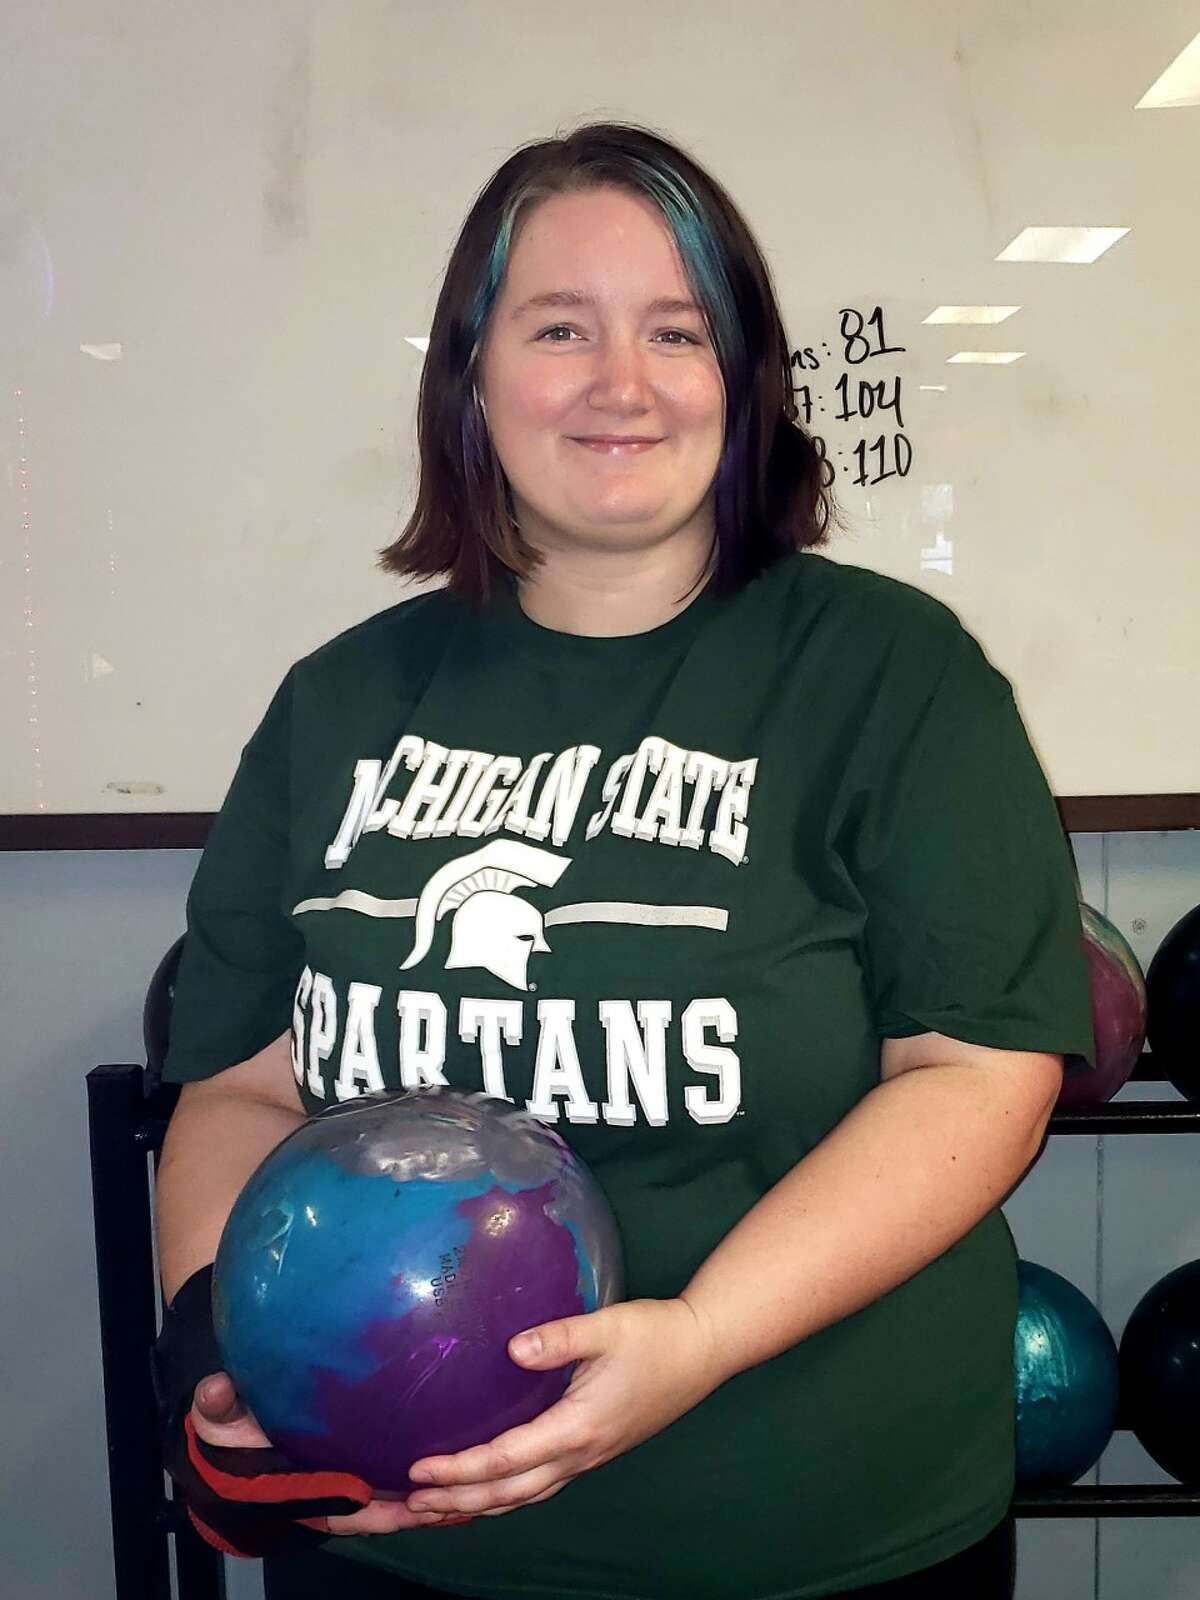 Courtney Pattengill highlights this week's bowling and pool scores. She bowled a 300 game on Jan. 12.